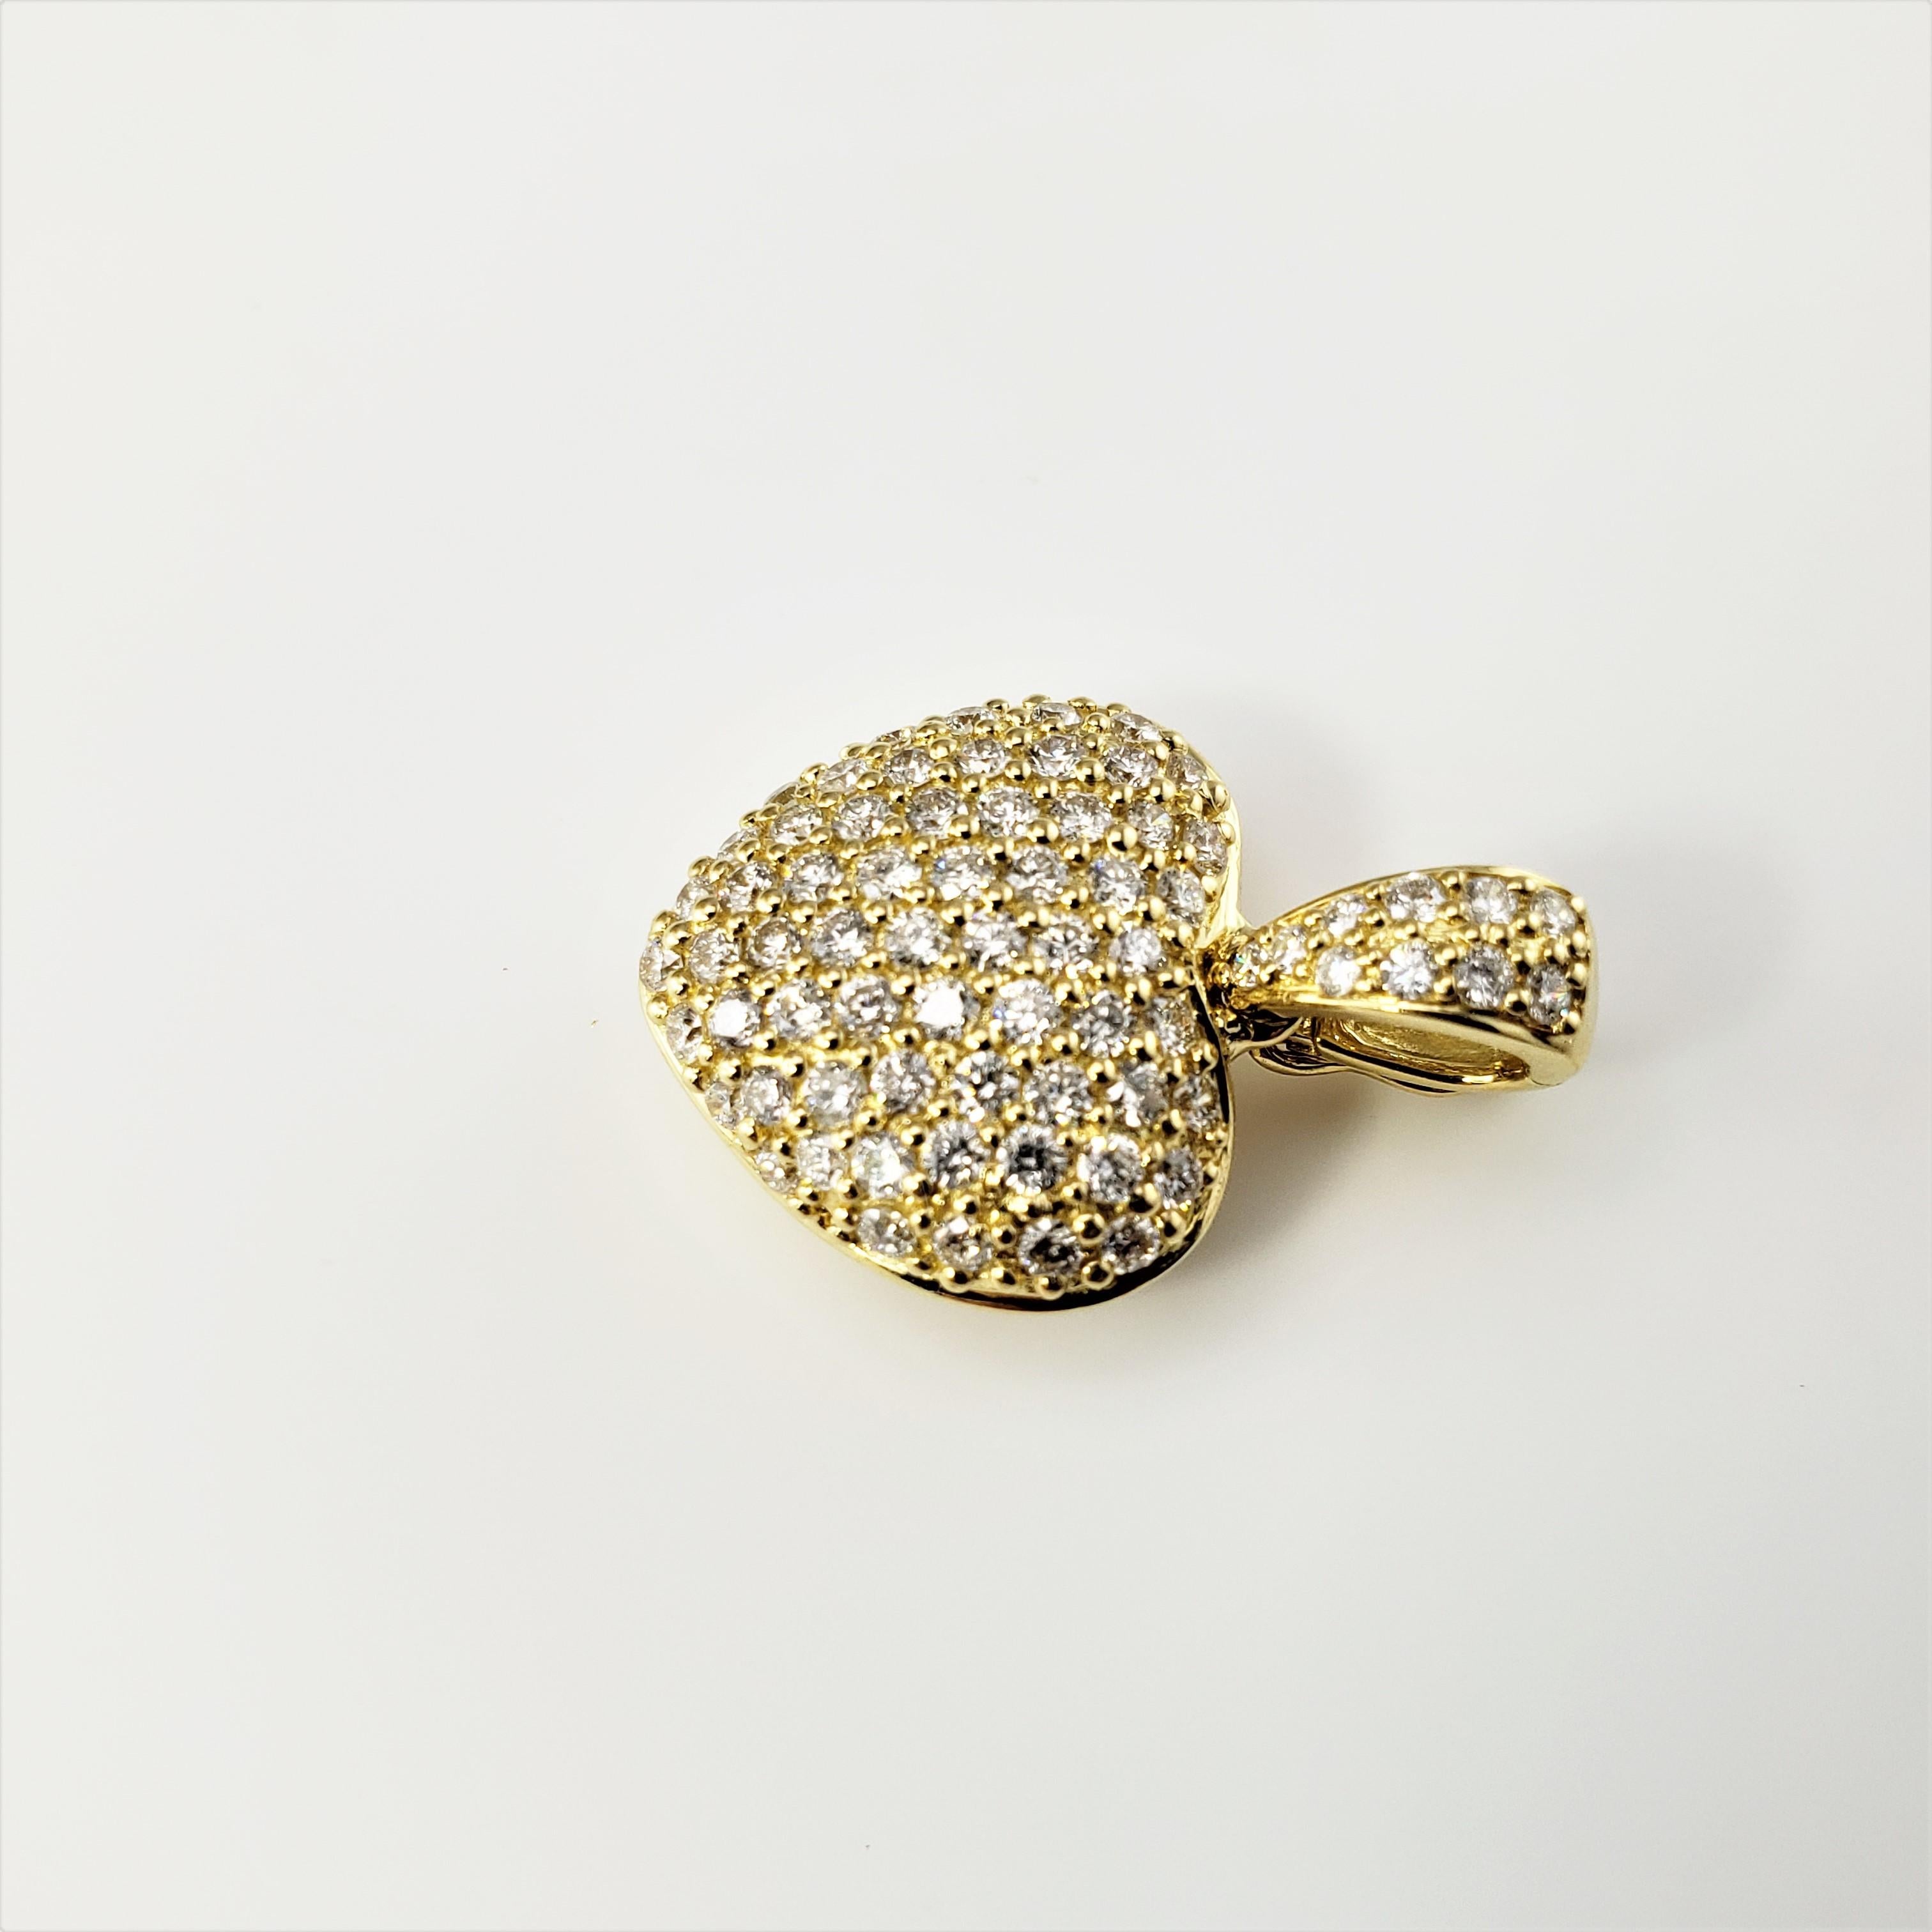 18 Karat Yellow Gold and Diamond Heart Pendant-

This sparkling heart pendant features 71 round brilliant cut diamonds set in classic 18K yellow gold.

Approximate total diamond weight:  .84 ct.

Diamond clarity:  SI1-VS2

Diamond color:  G

Size: 